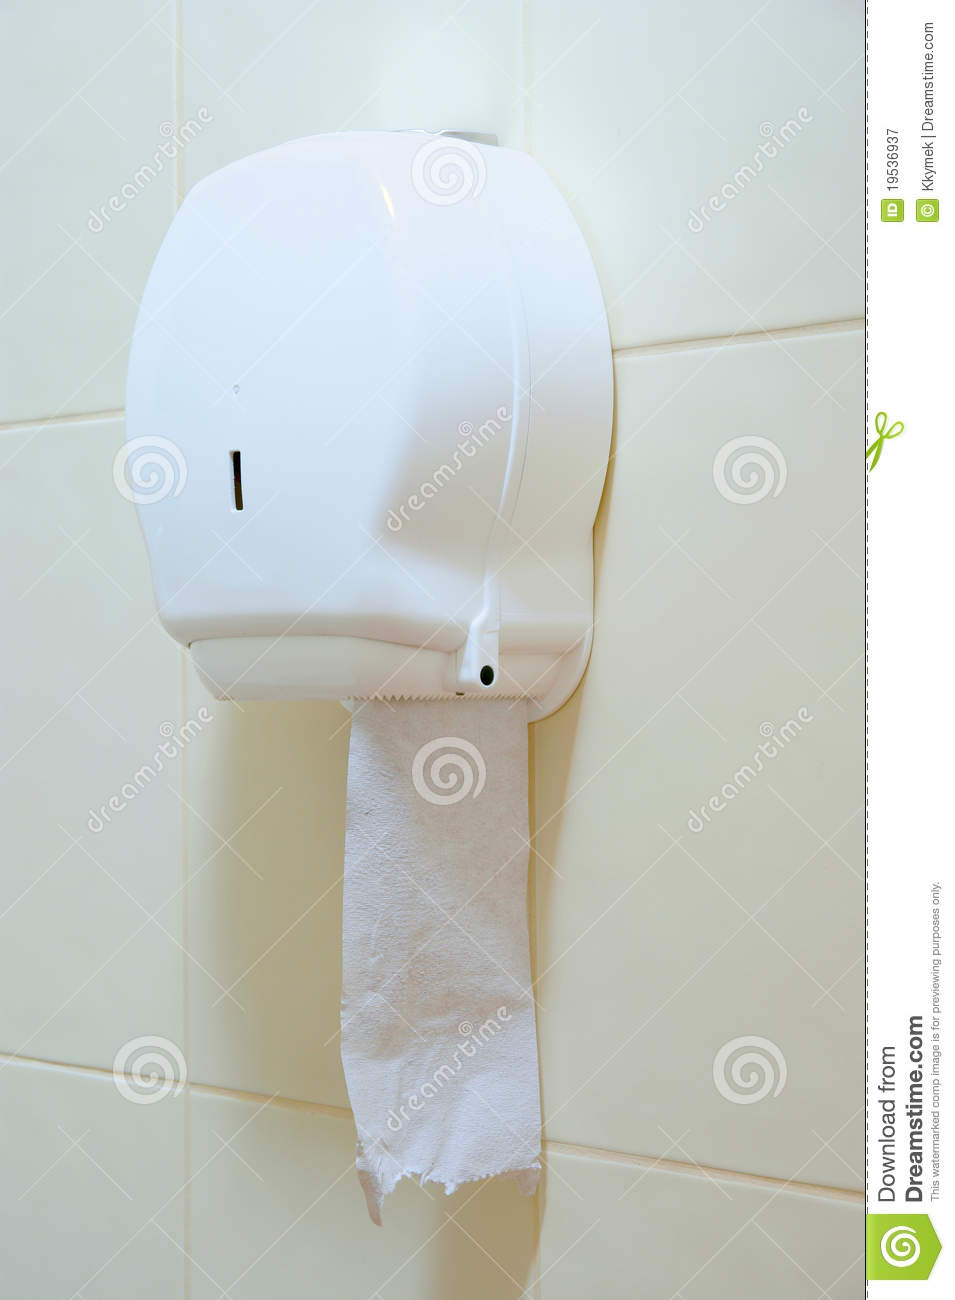 Paper Towel Dispenser Royalty Free Stock Photography   Image  19536937